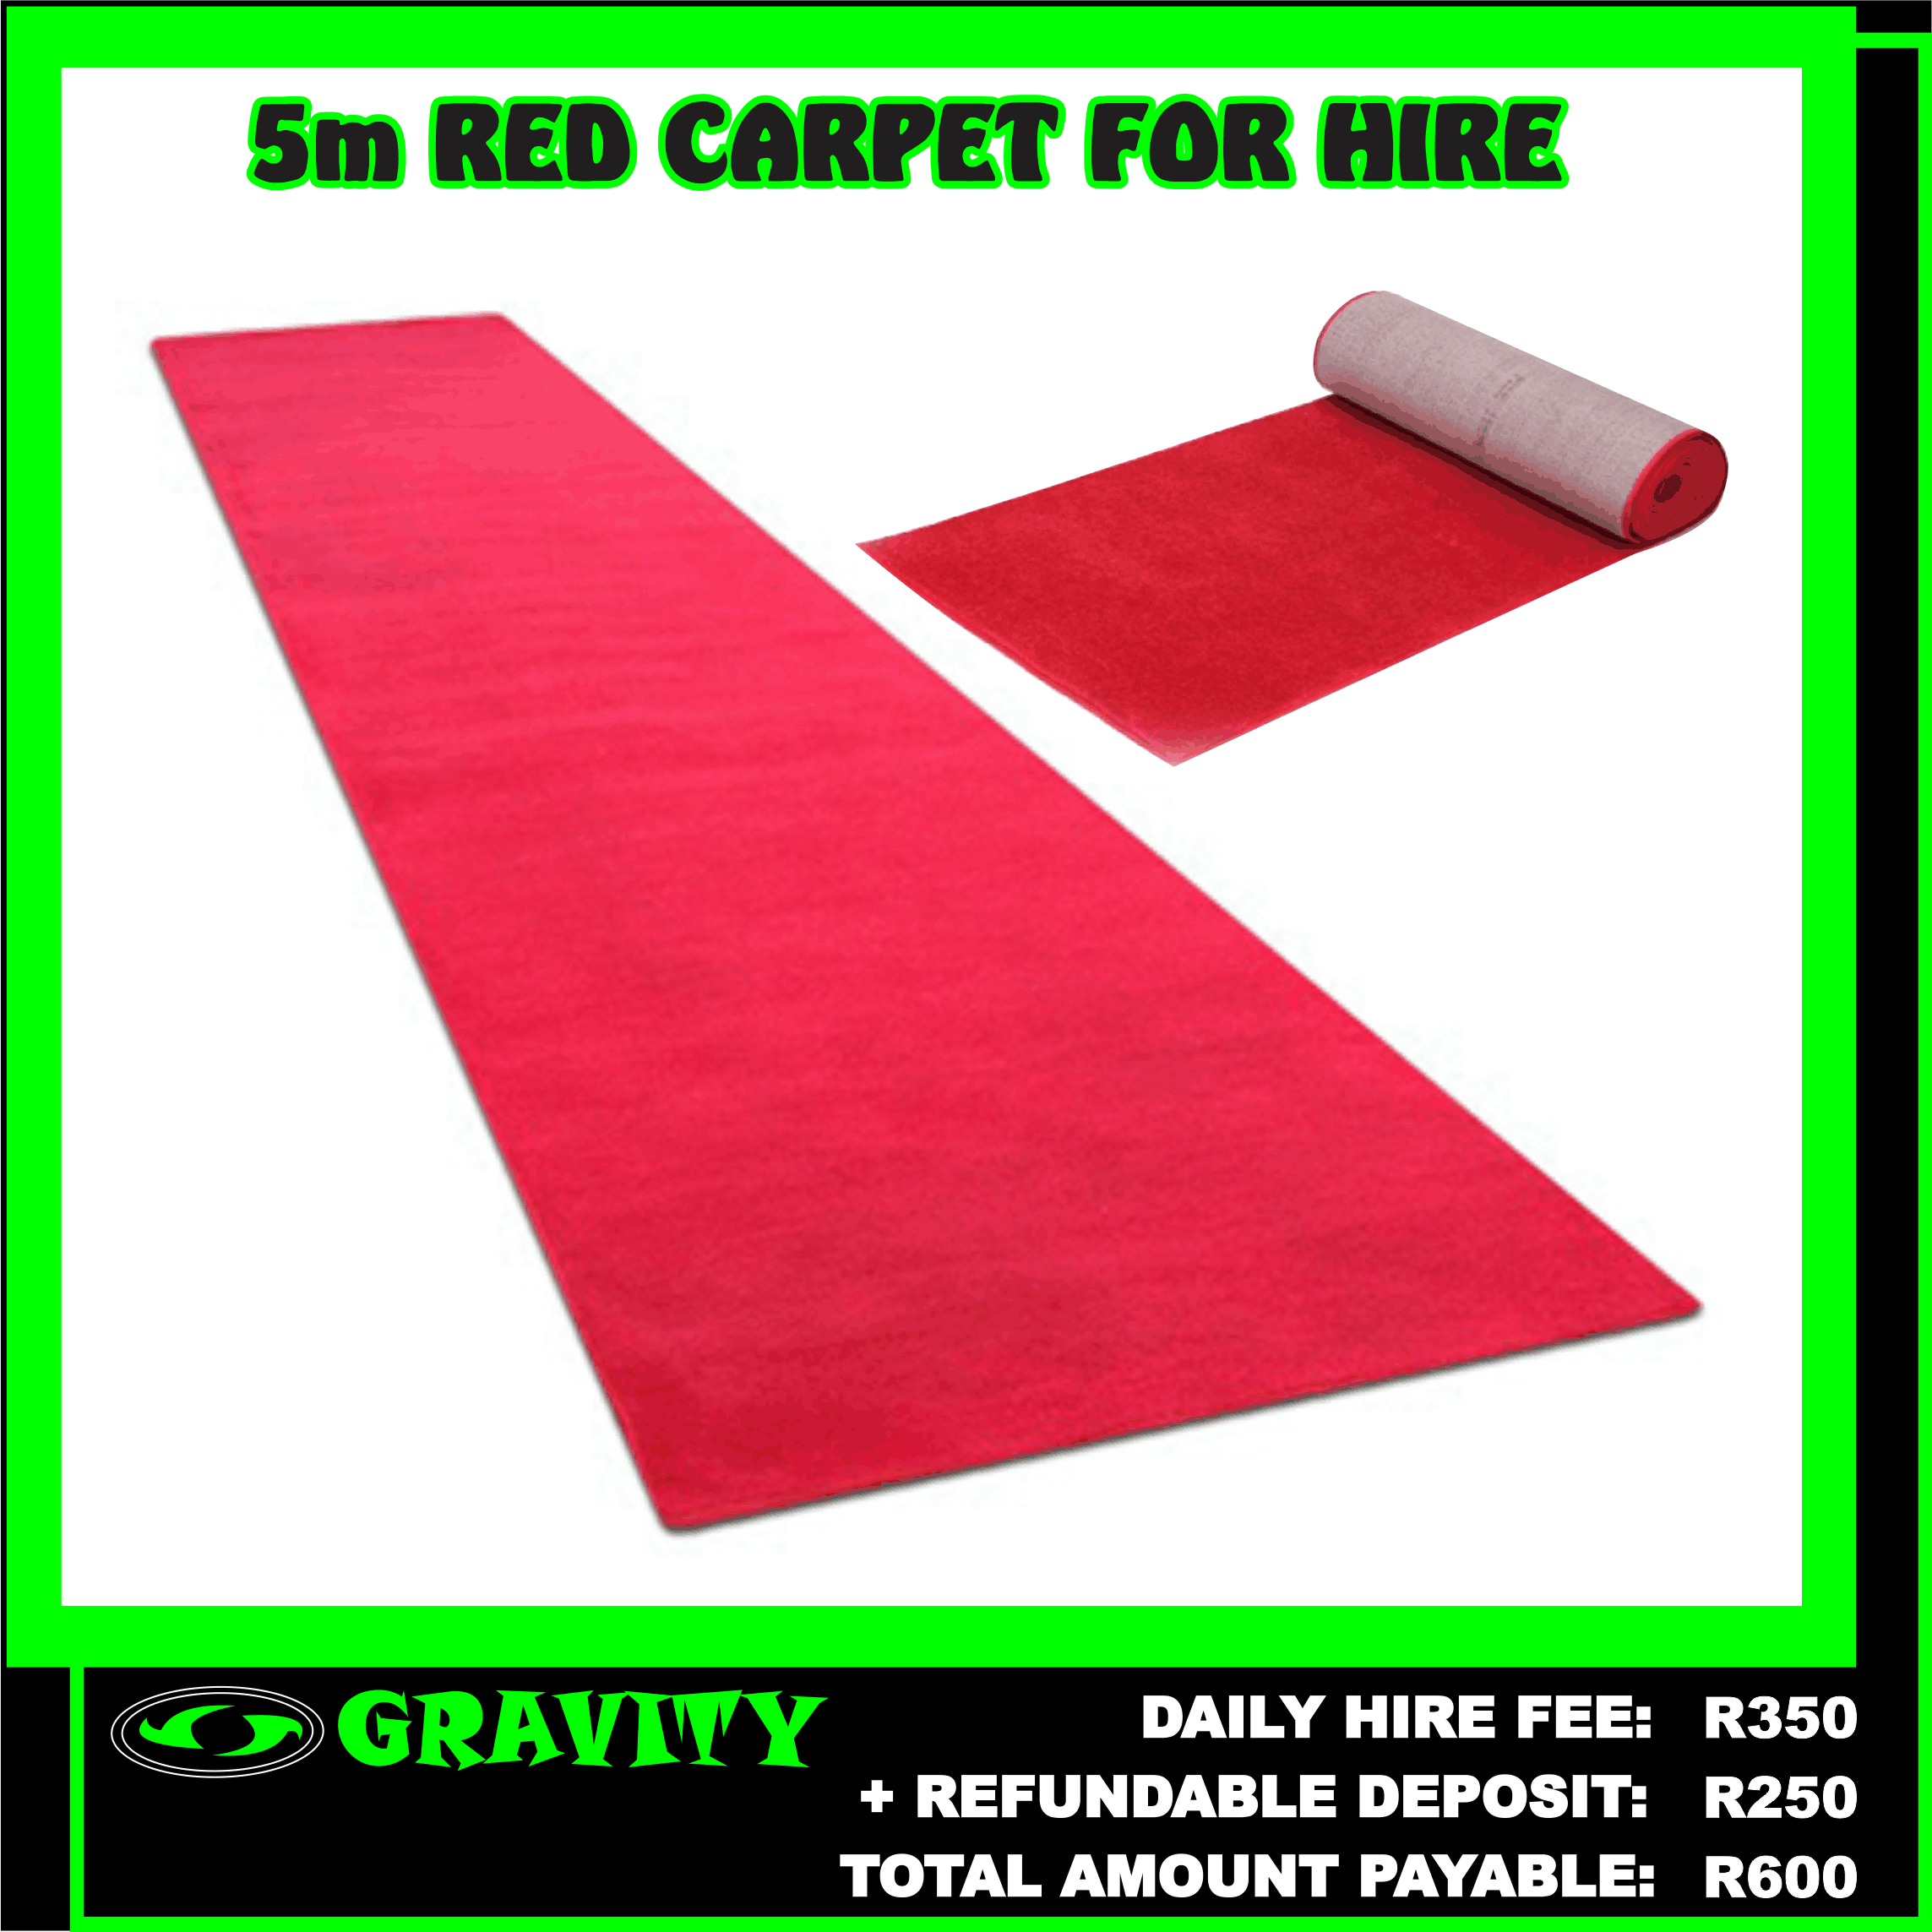 5M RED CARPET FOR HIRE DURBAN 